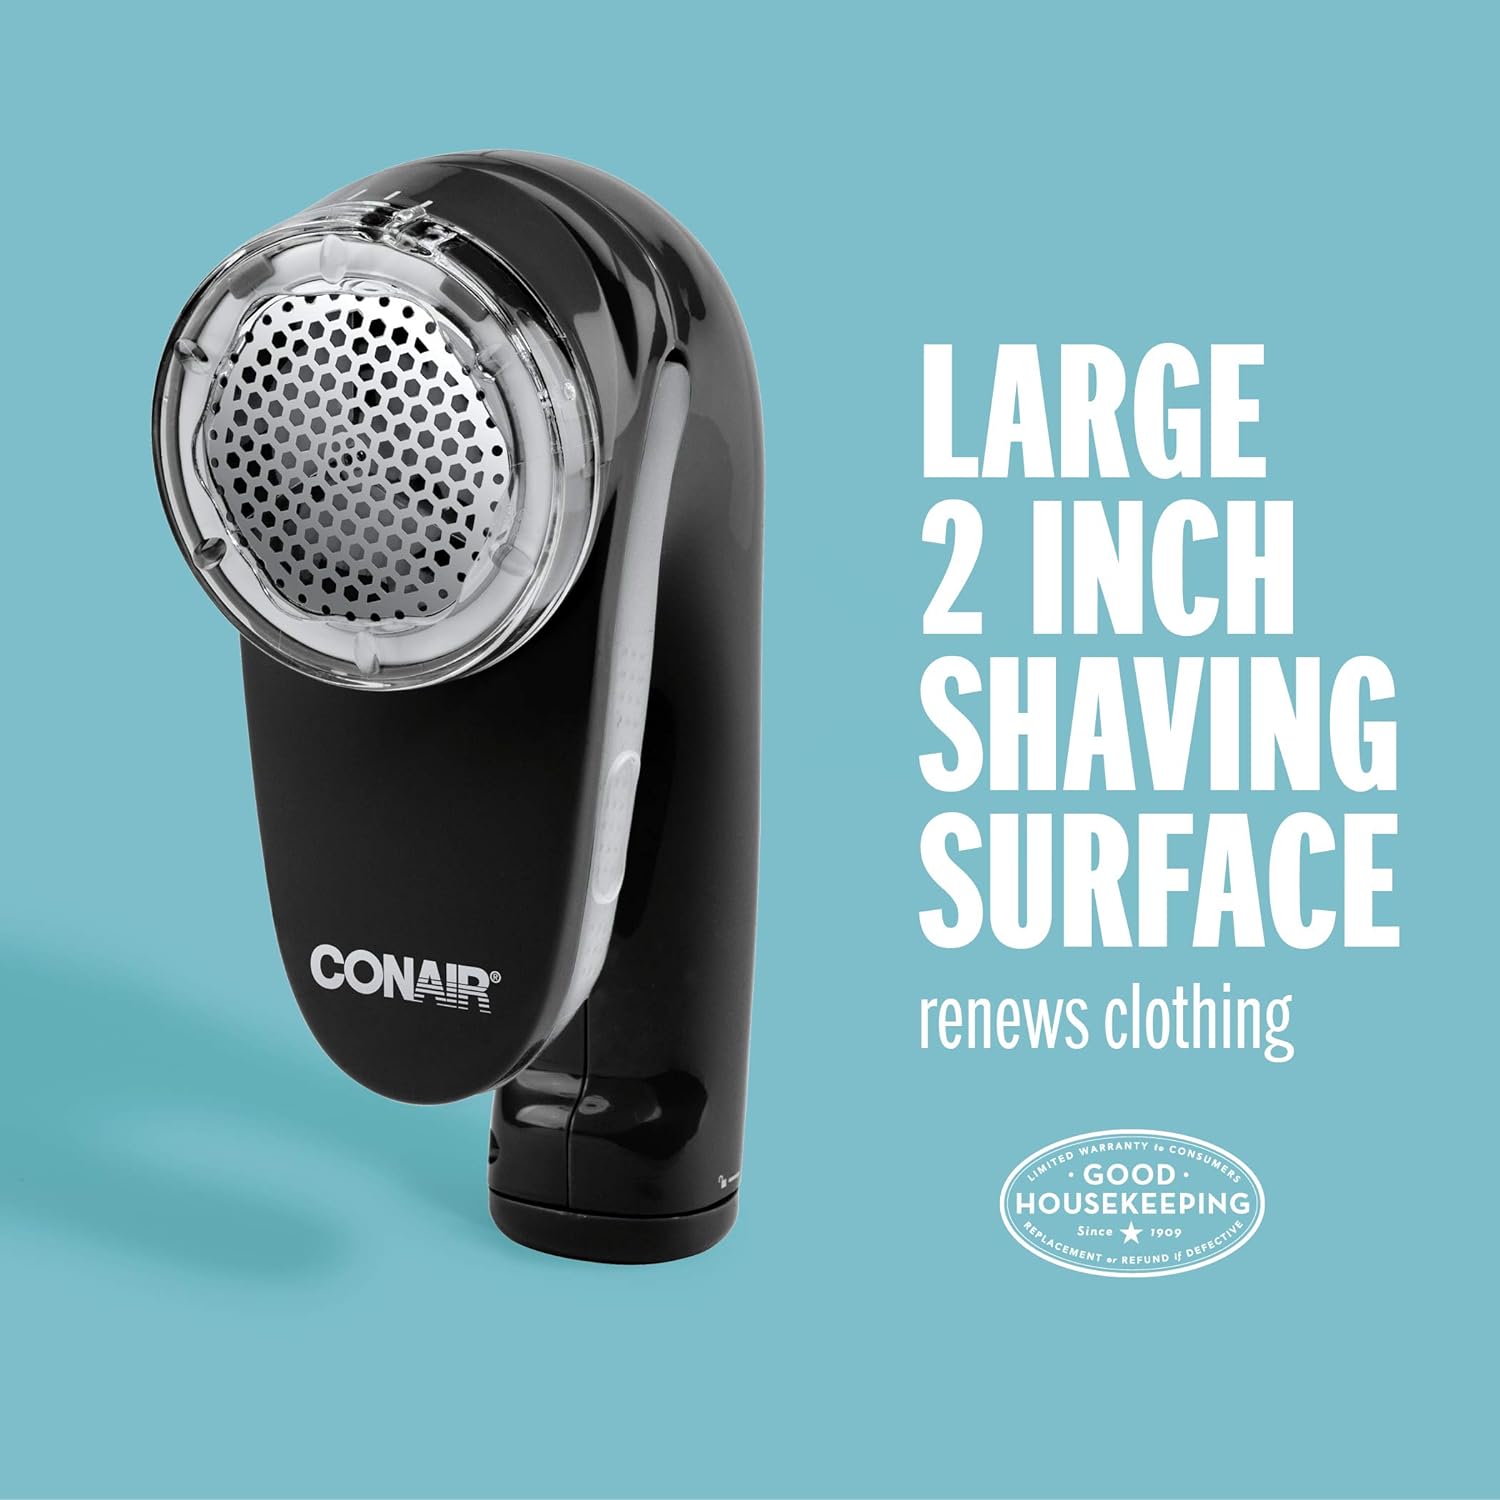 Conair Fabric Shaver - Fuzz Remover, Lint Remover, Rechargeable Fabric Shaver, Black